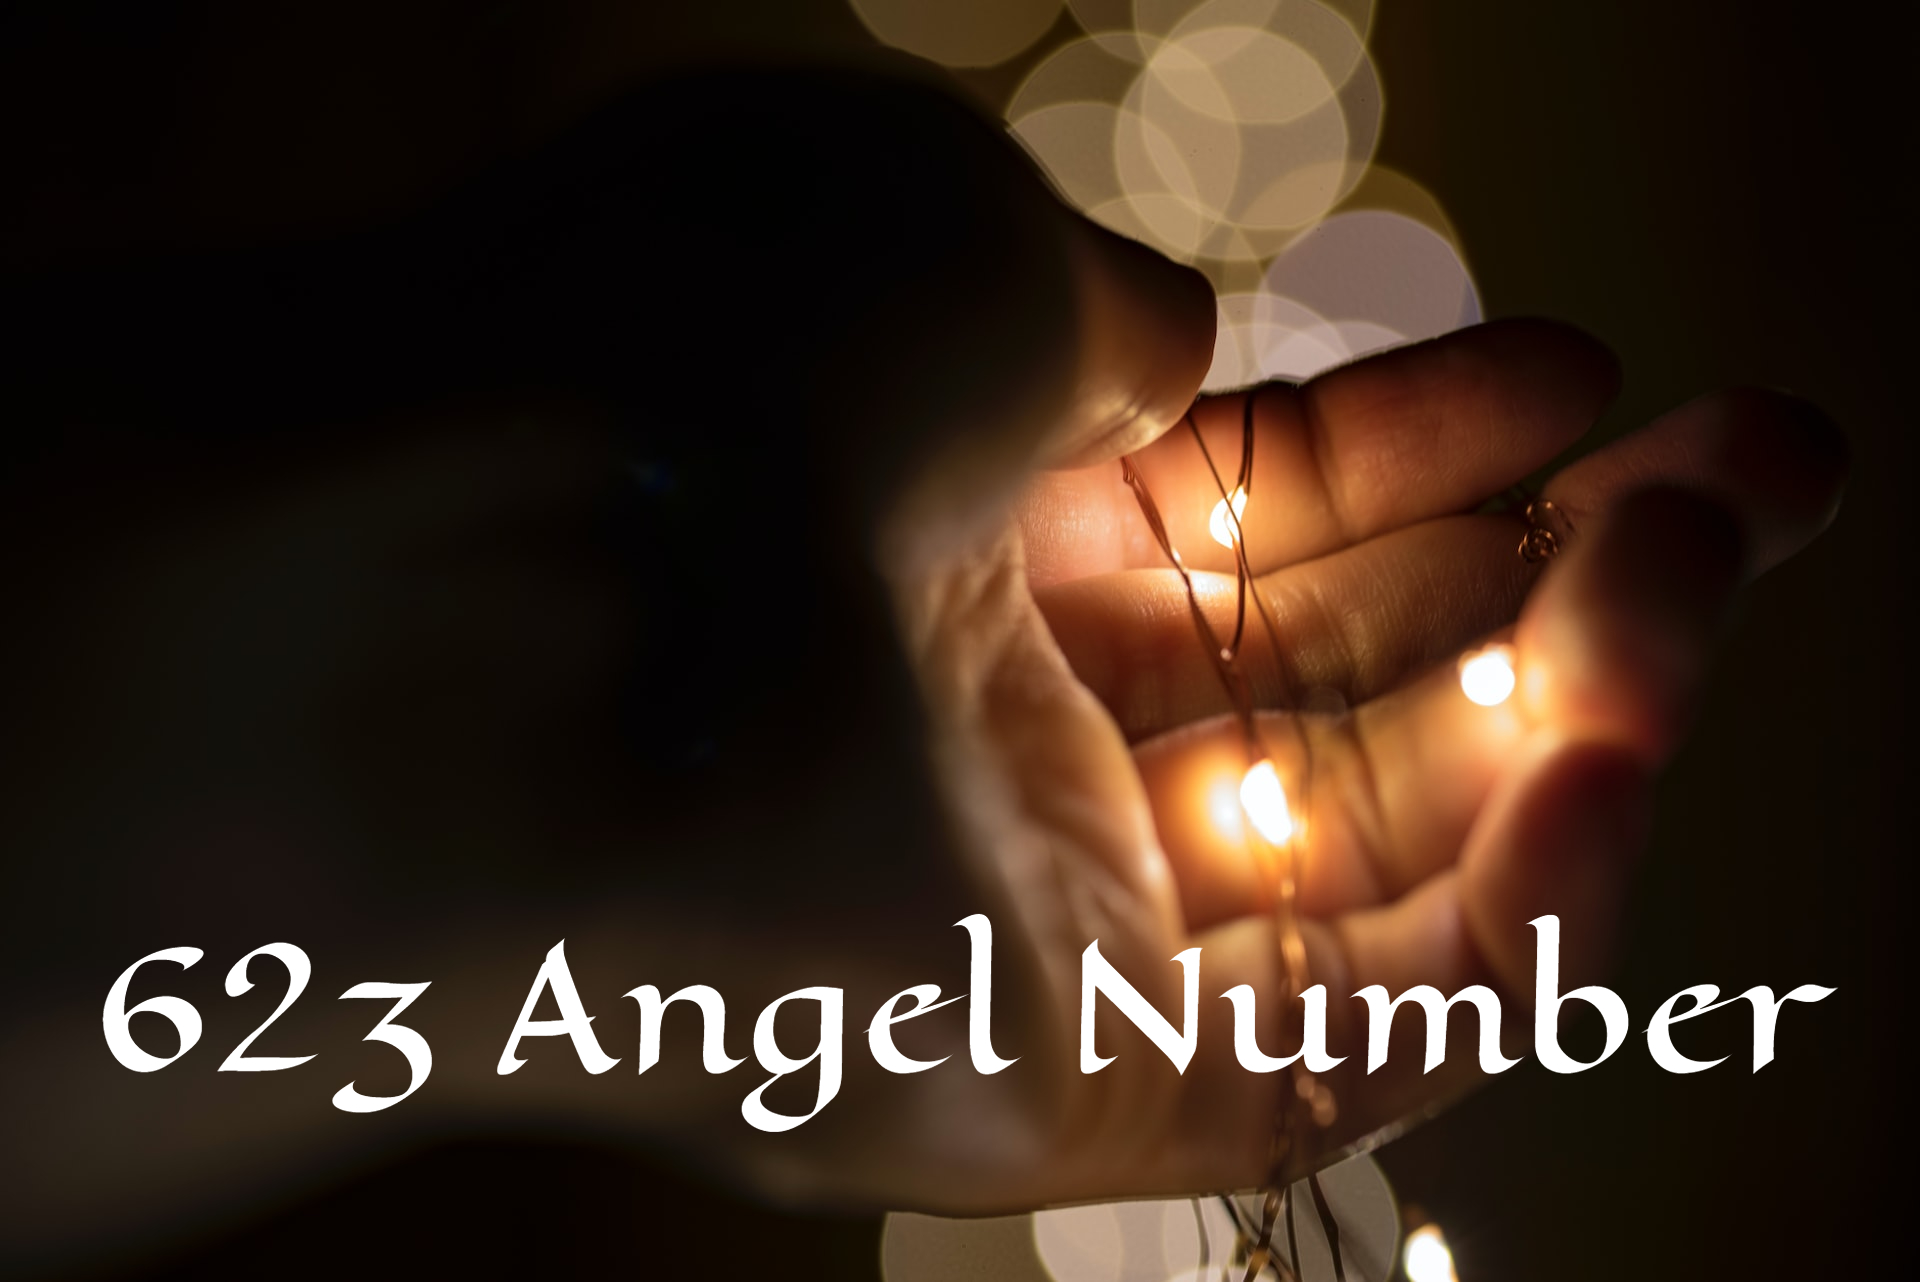 623 Angel Number Symbolism - Sacrifice And Compromise